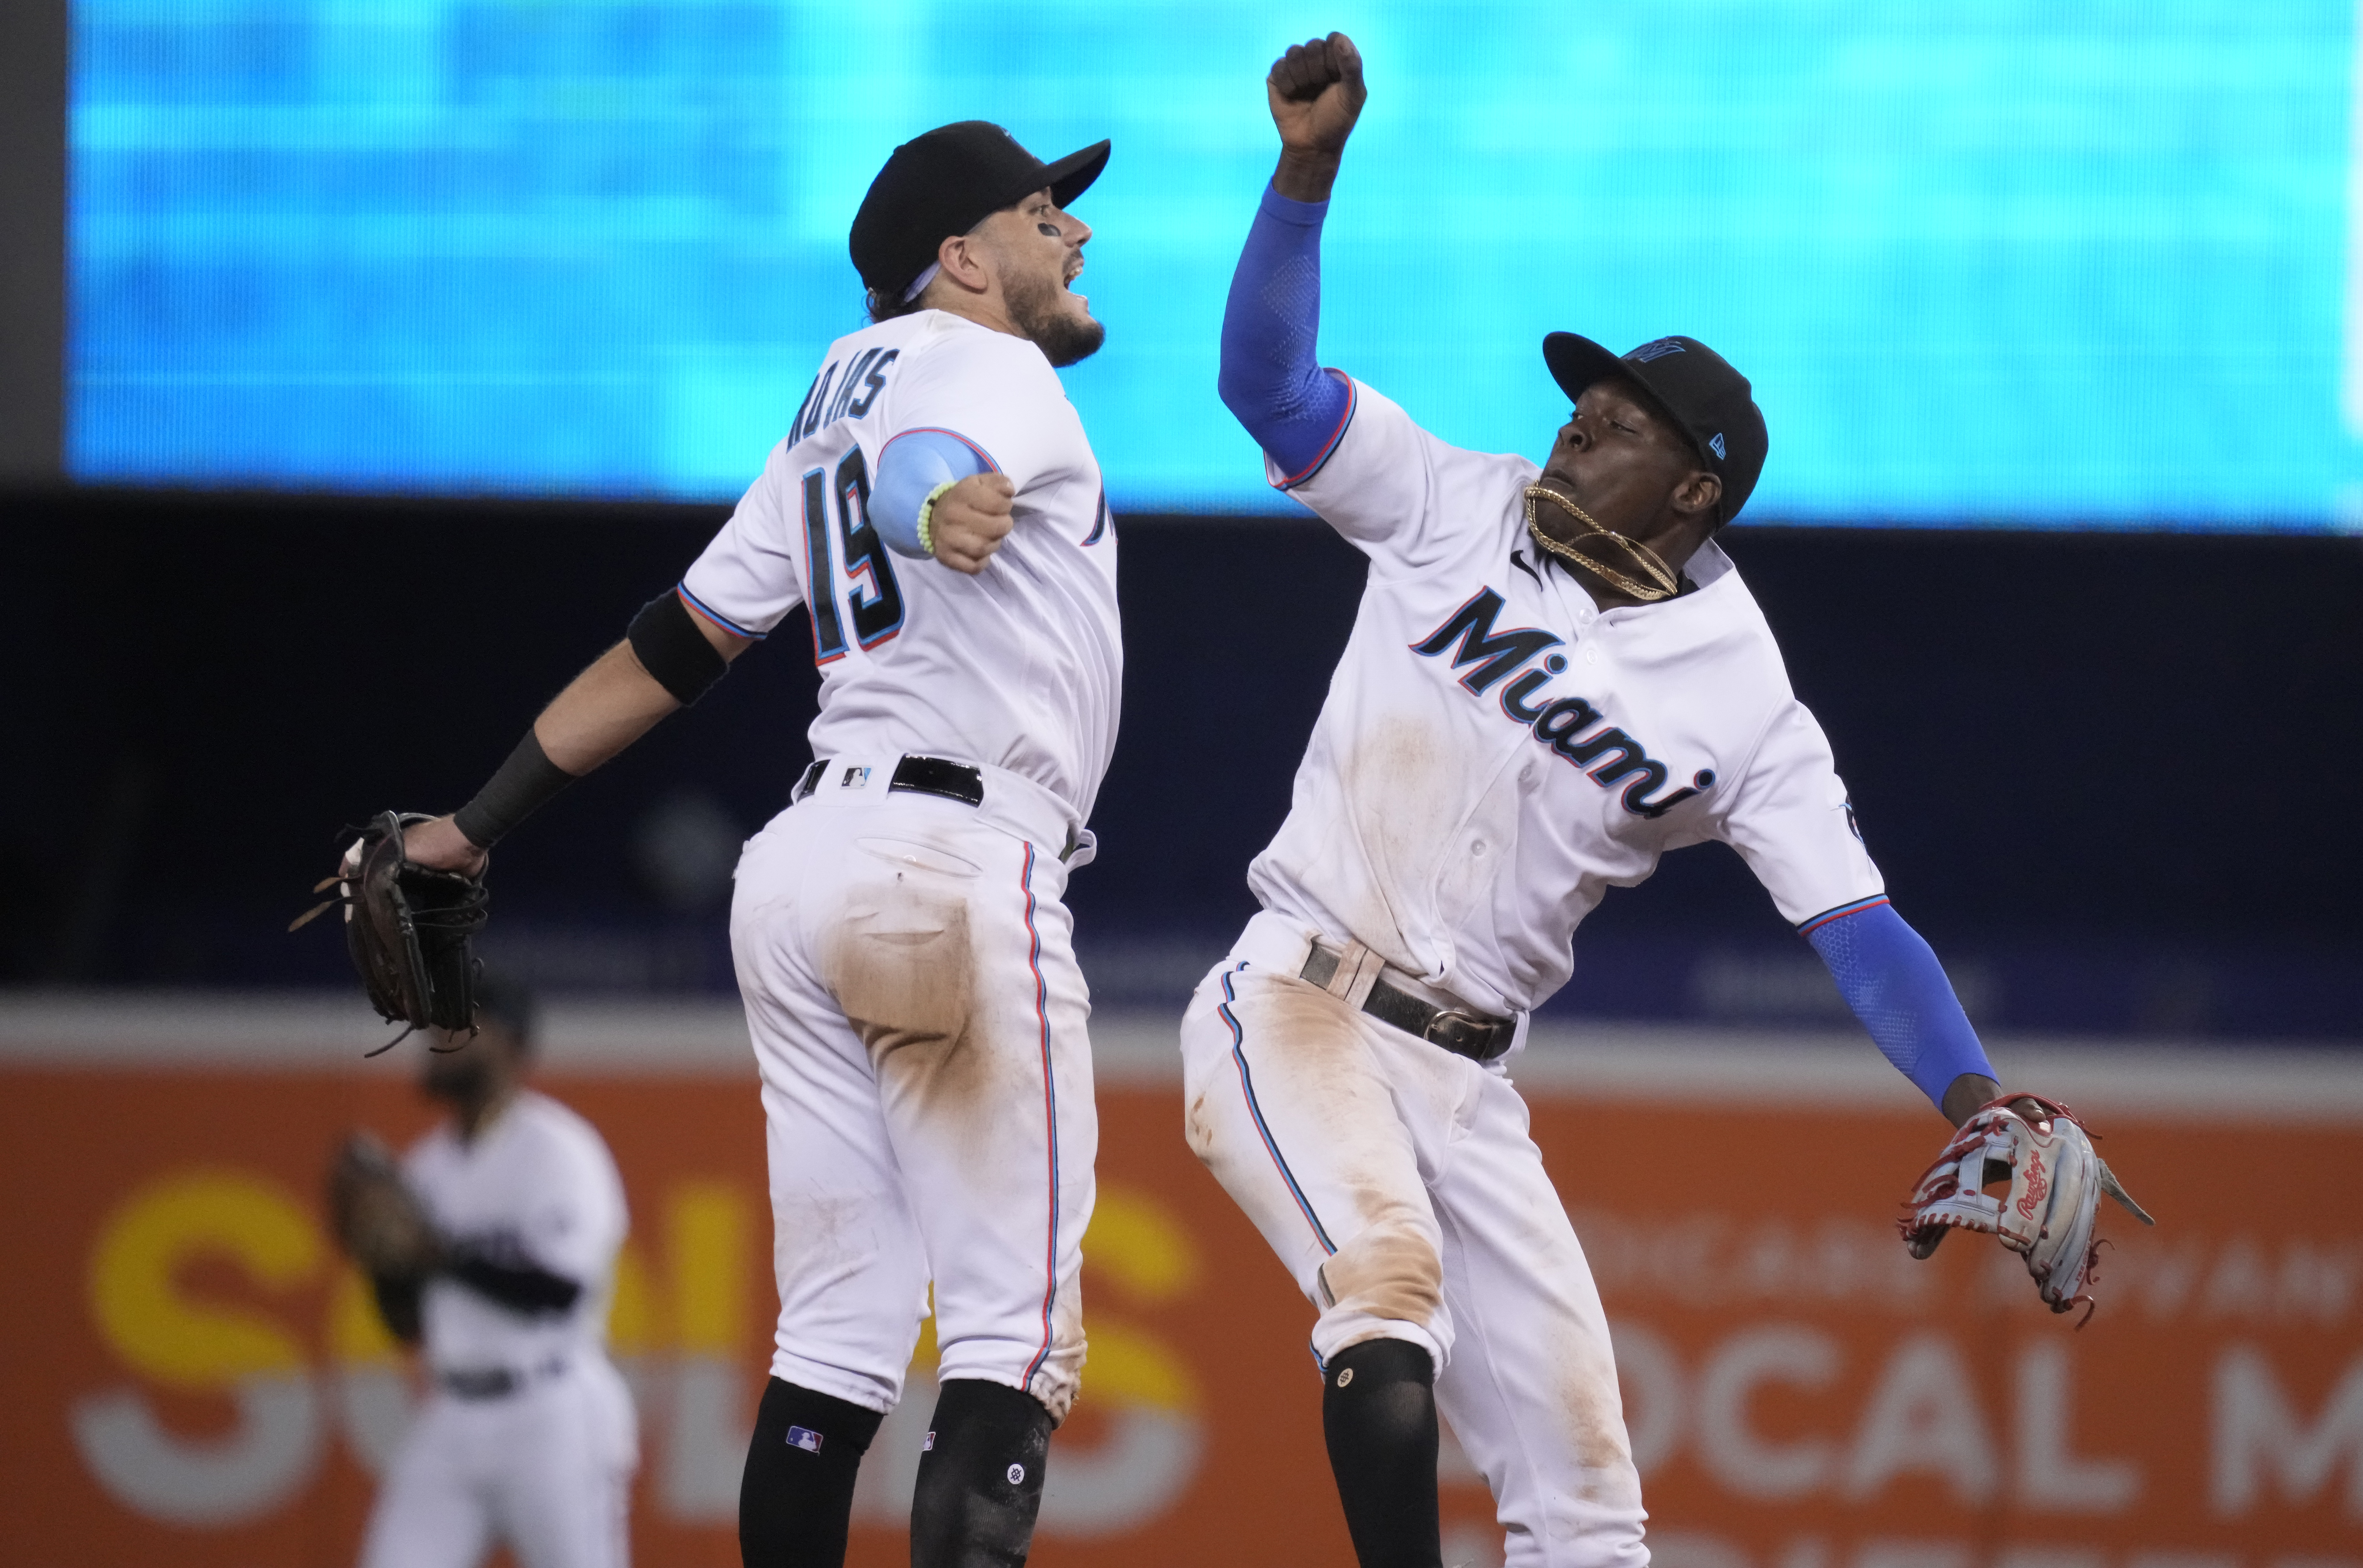 MIAMI, FLORIDA - AUGUST 02: Jazz Chisholm Jr. #2 and Miguel Rojas #19 of the Miami Marlins celebrate after defeating the New York Mets by score of 6-3 at loanDepot park on August 02, 2021 in Miami, Florida. Mark Brown/Getty Images